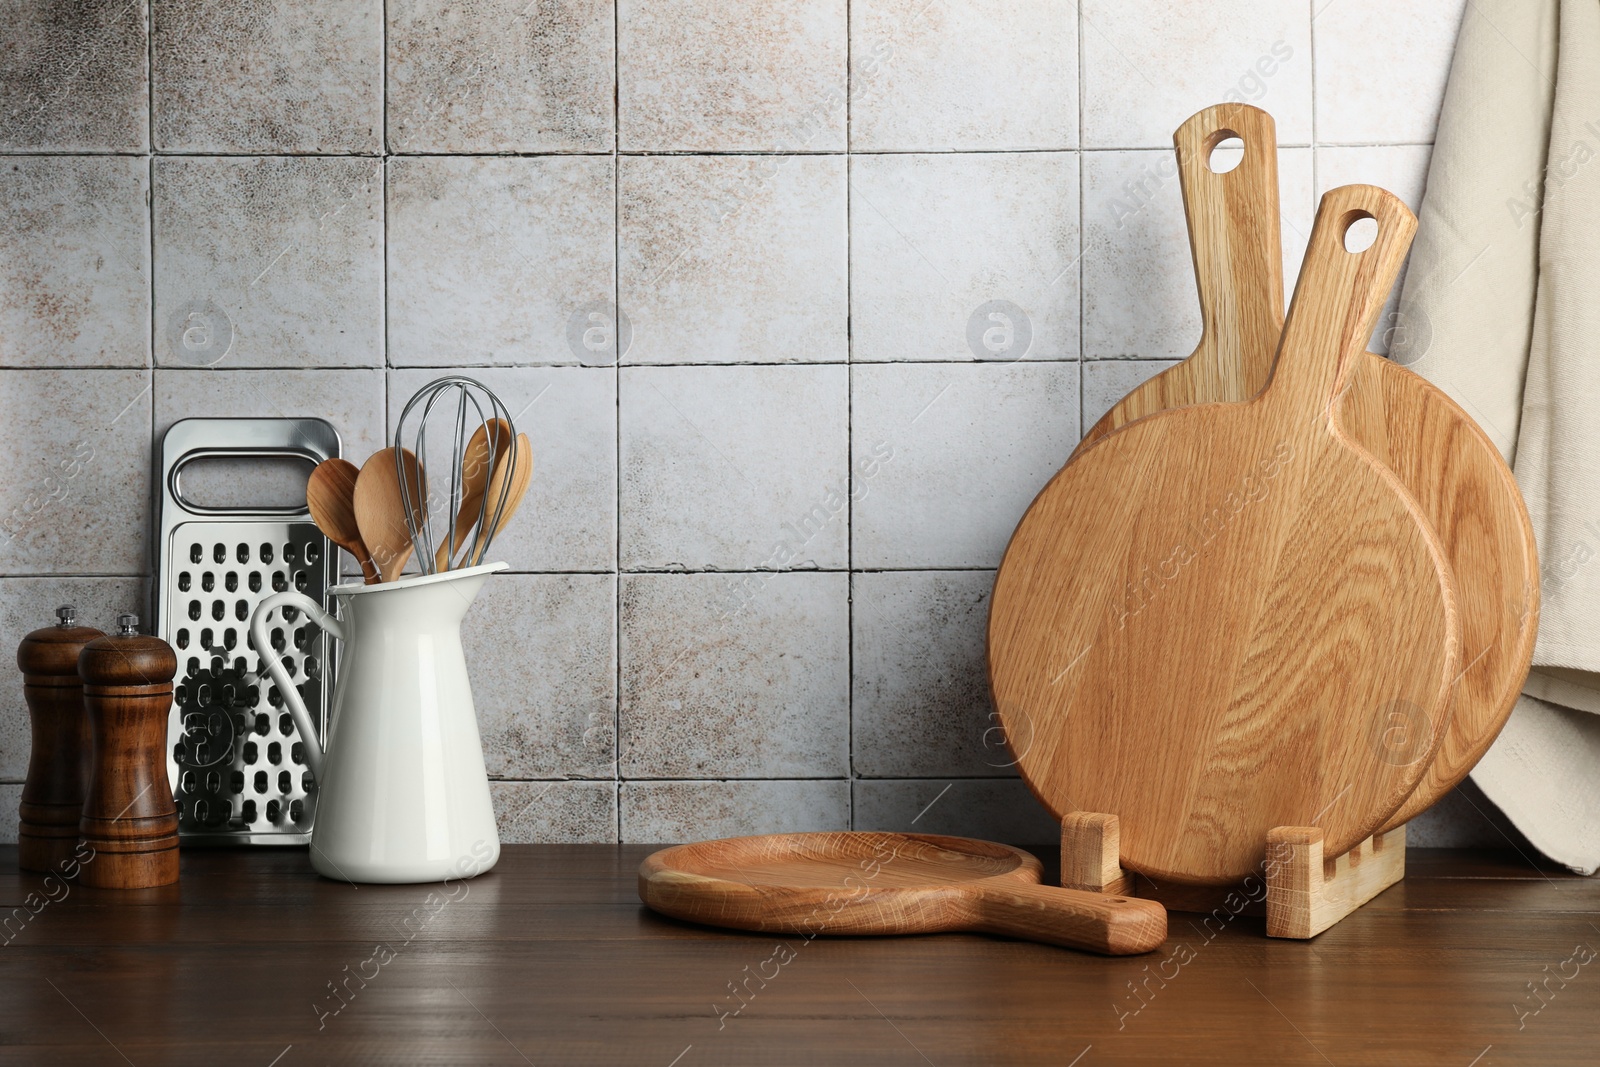 Photo of Wooden cutting boards and kitchen utensils on table near tiled wall